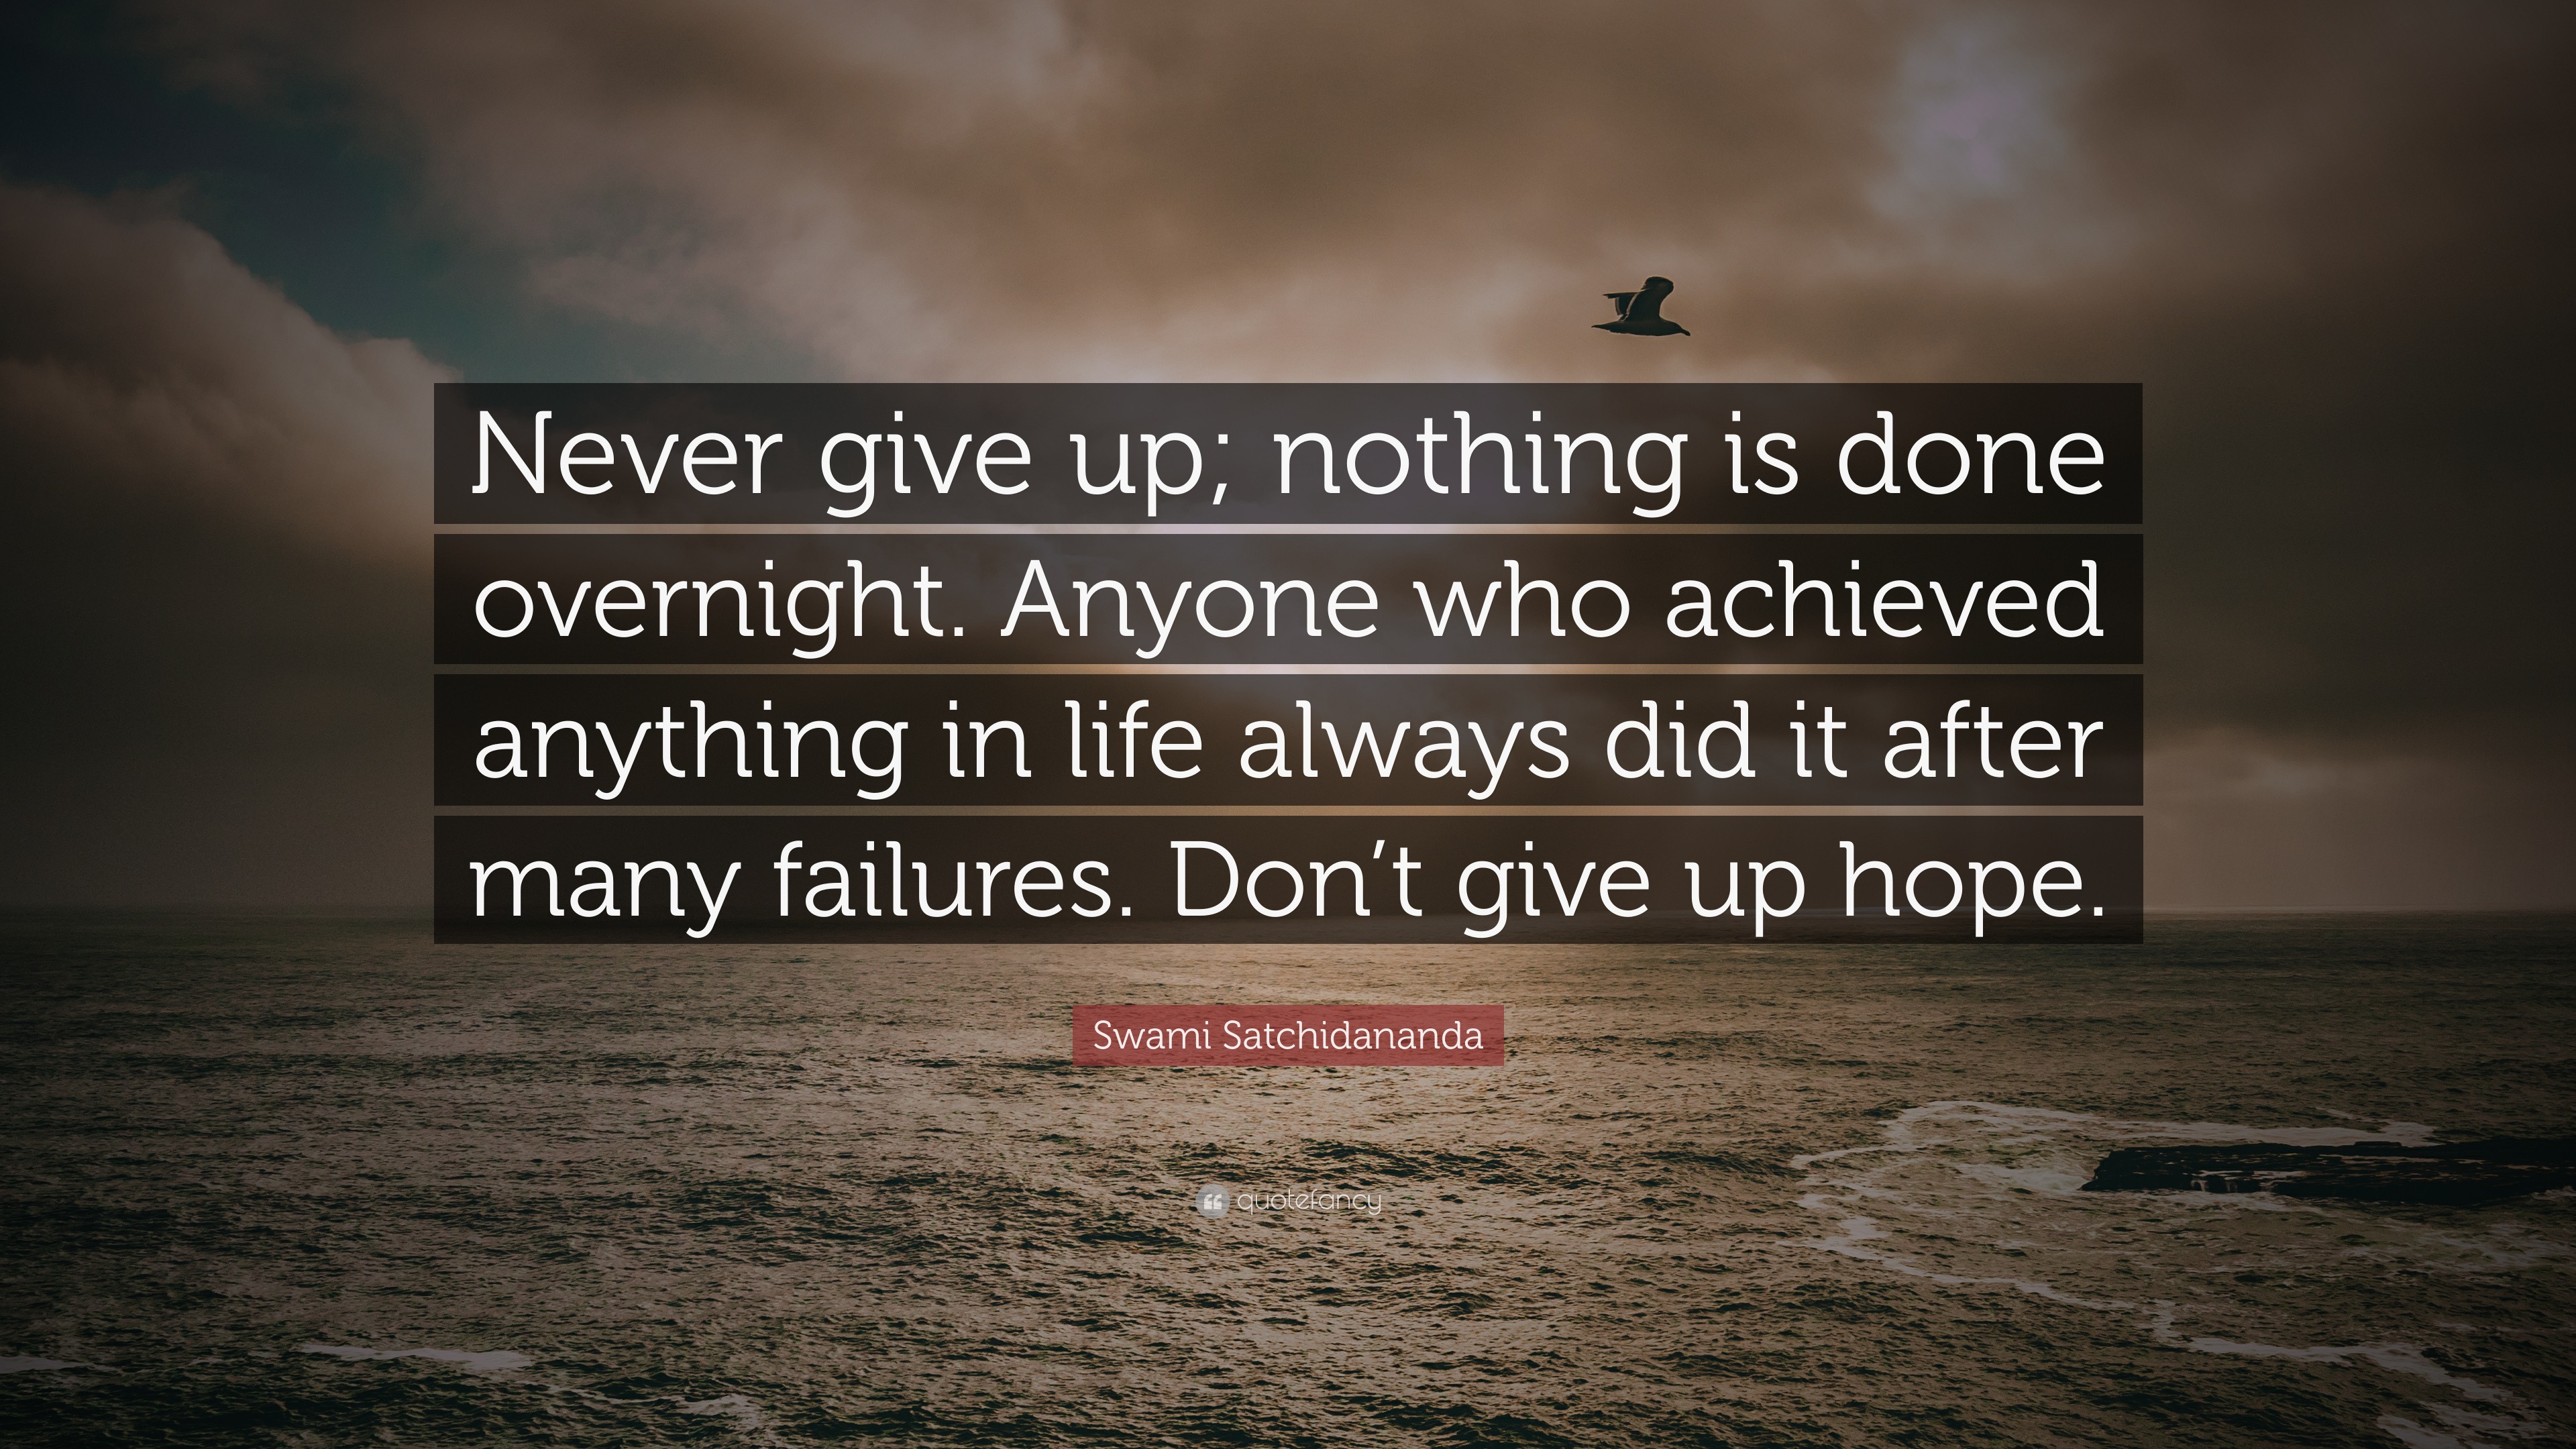 Swami Satchidananda Quote: “Never give up; nothing is done overnight ...